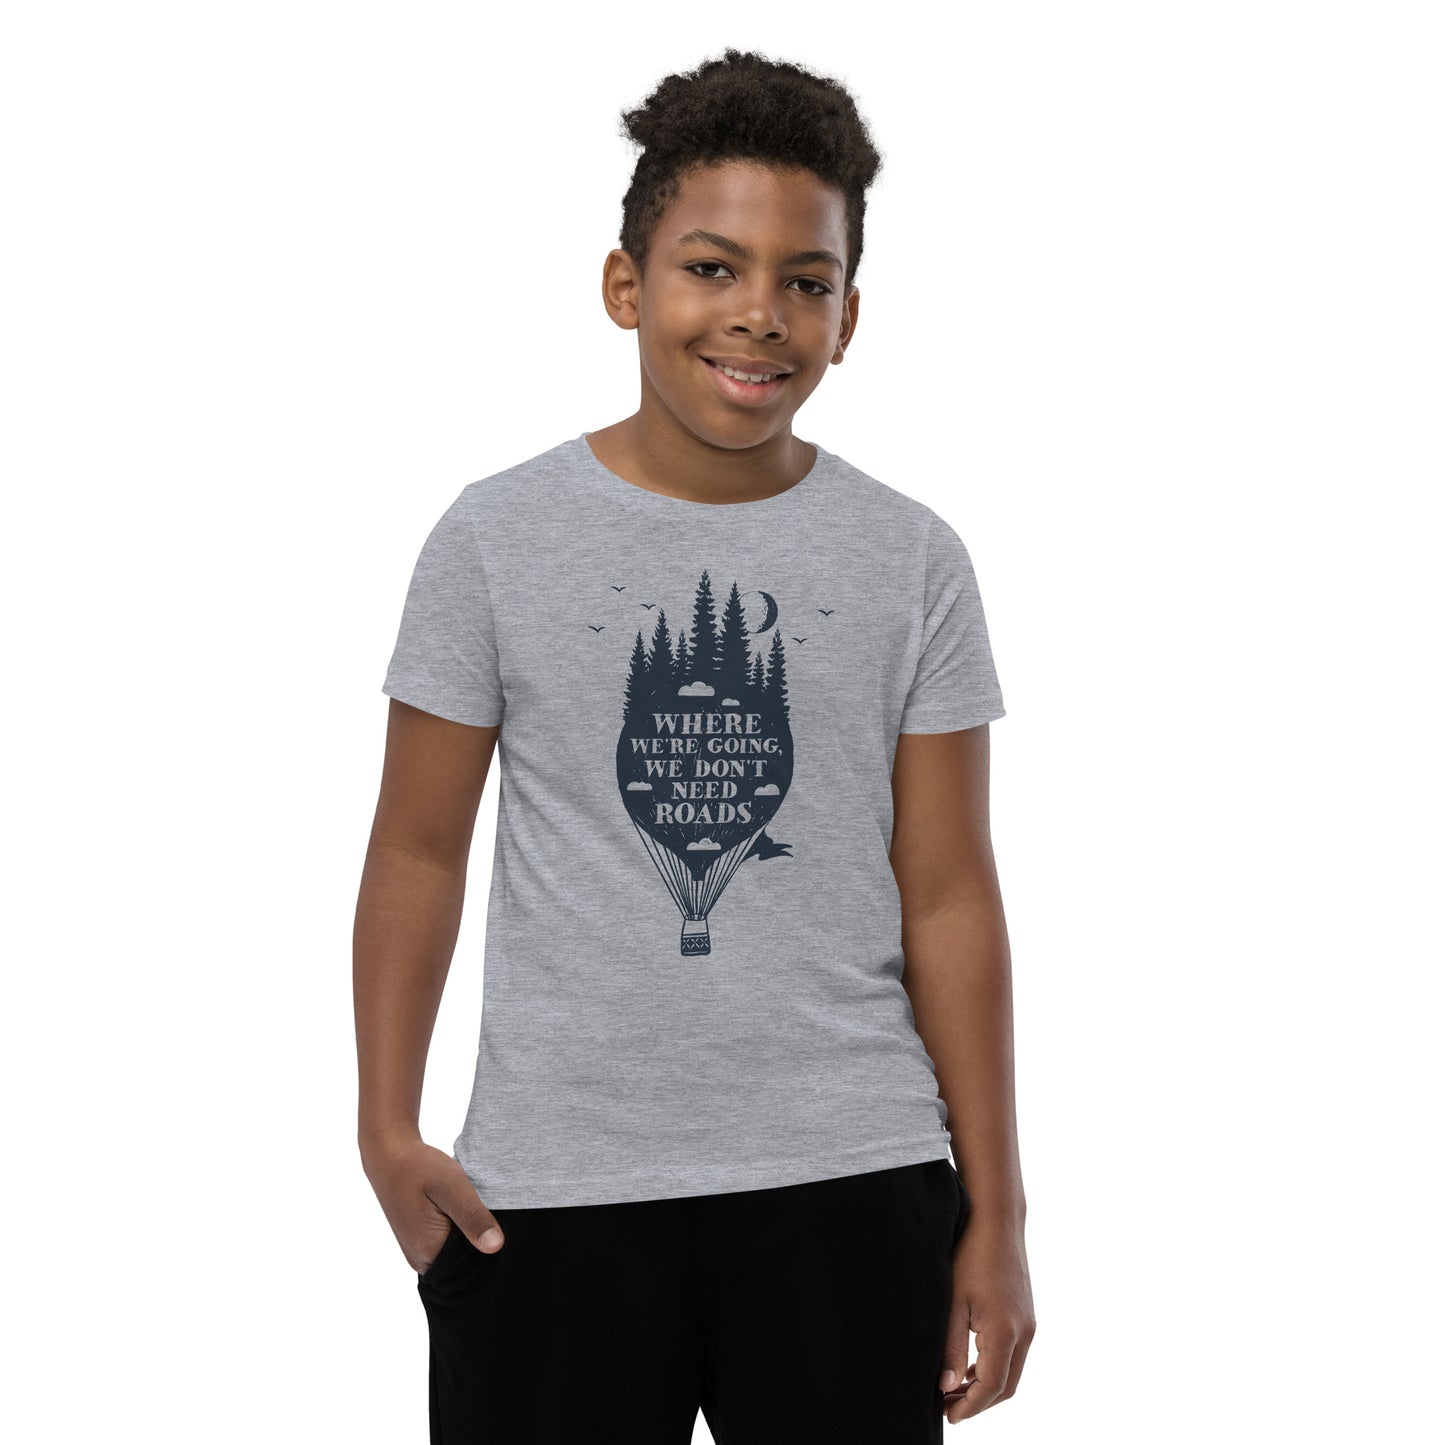 "We Don't Need Roads" Youth T-Shirt